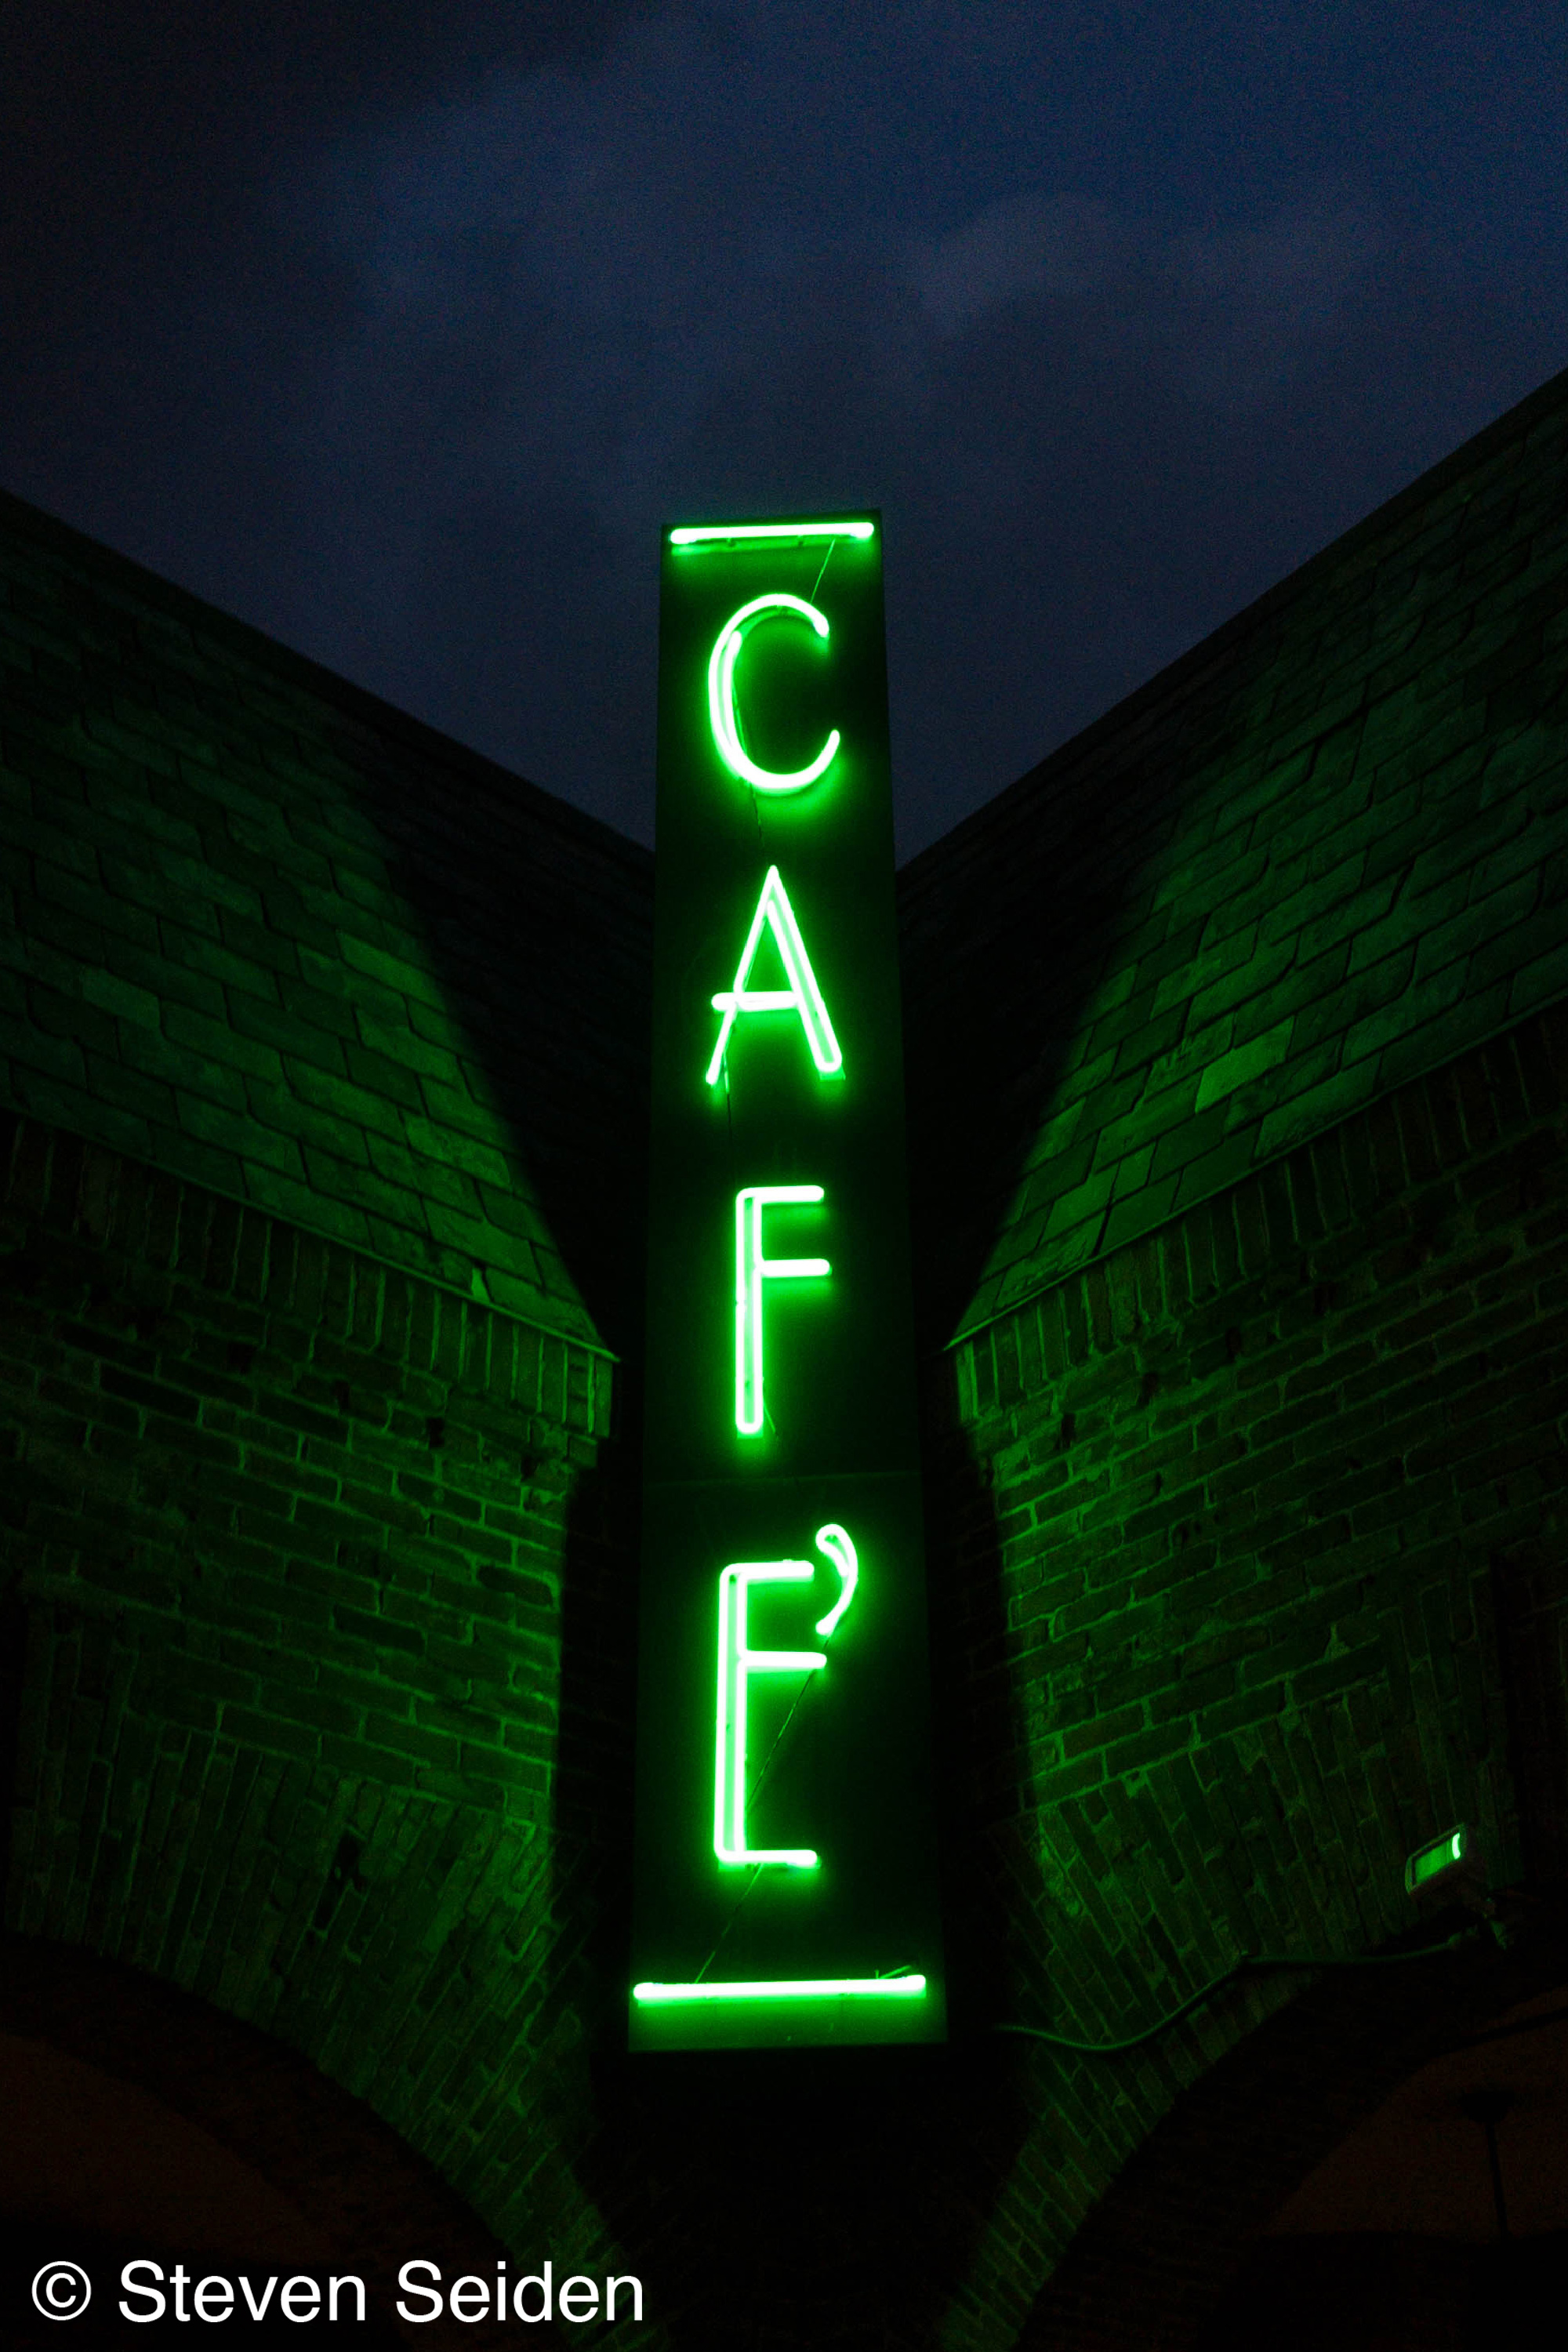 A picture of a neon sign saying 'cafe' taken at night.